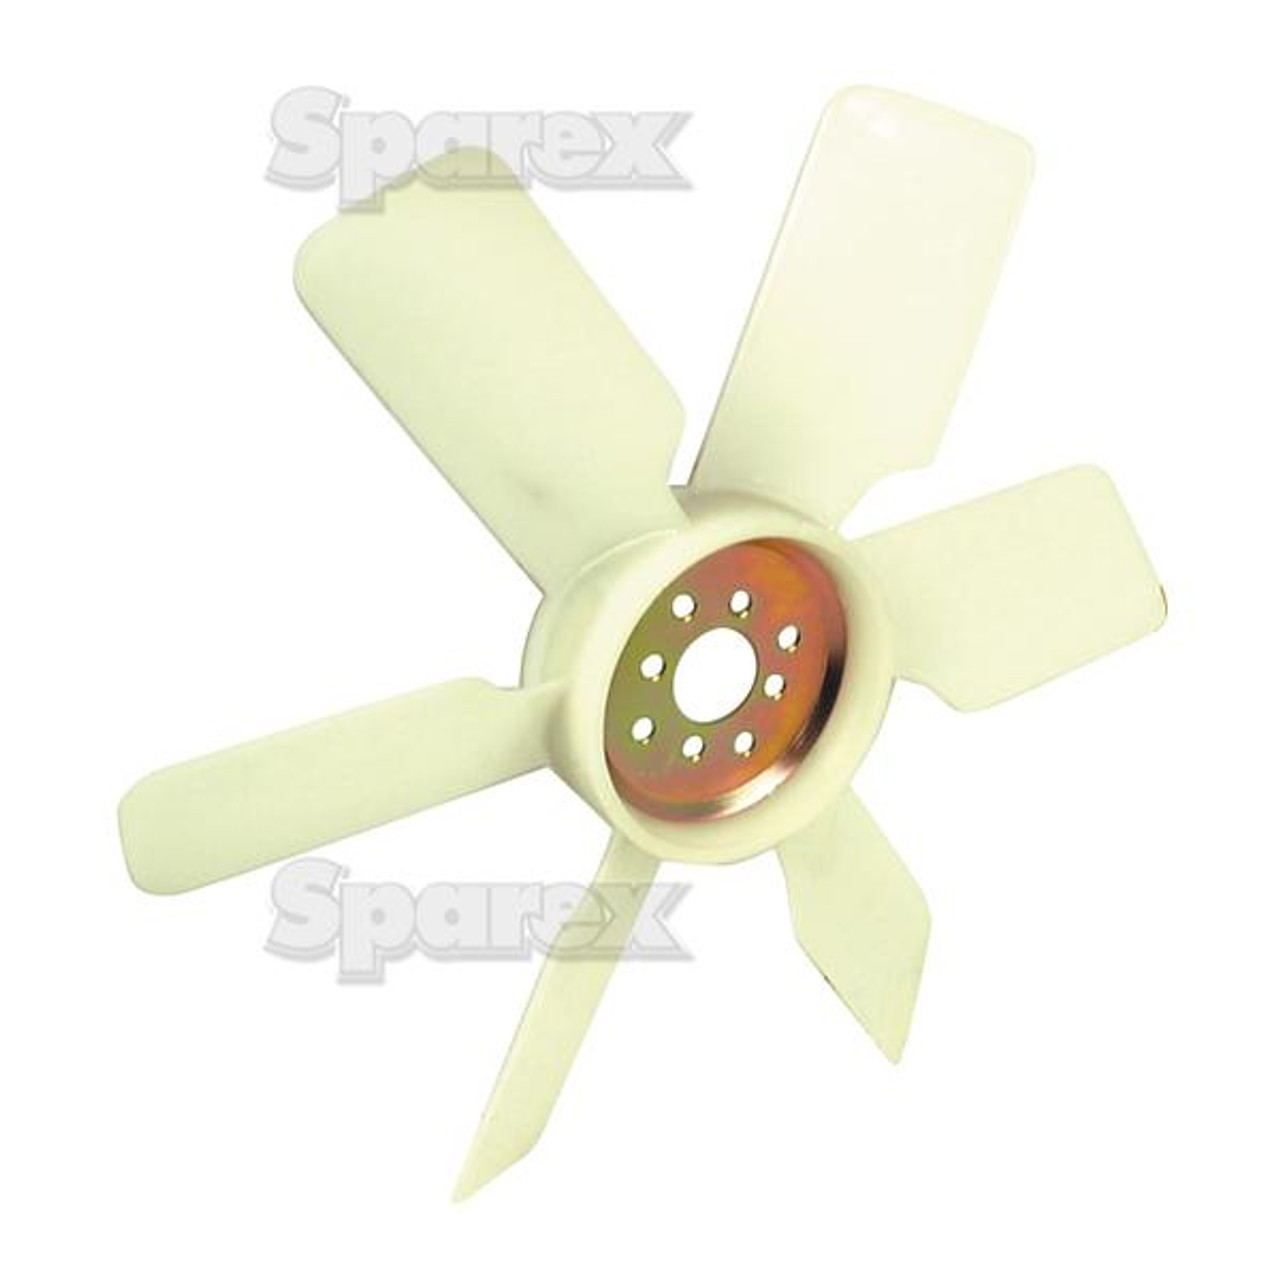 Tractor  FAN, 7 BLADE, PLASTIC Part Number S70648